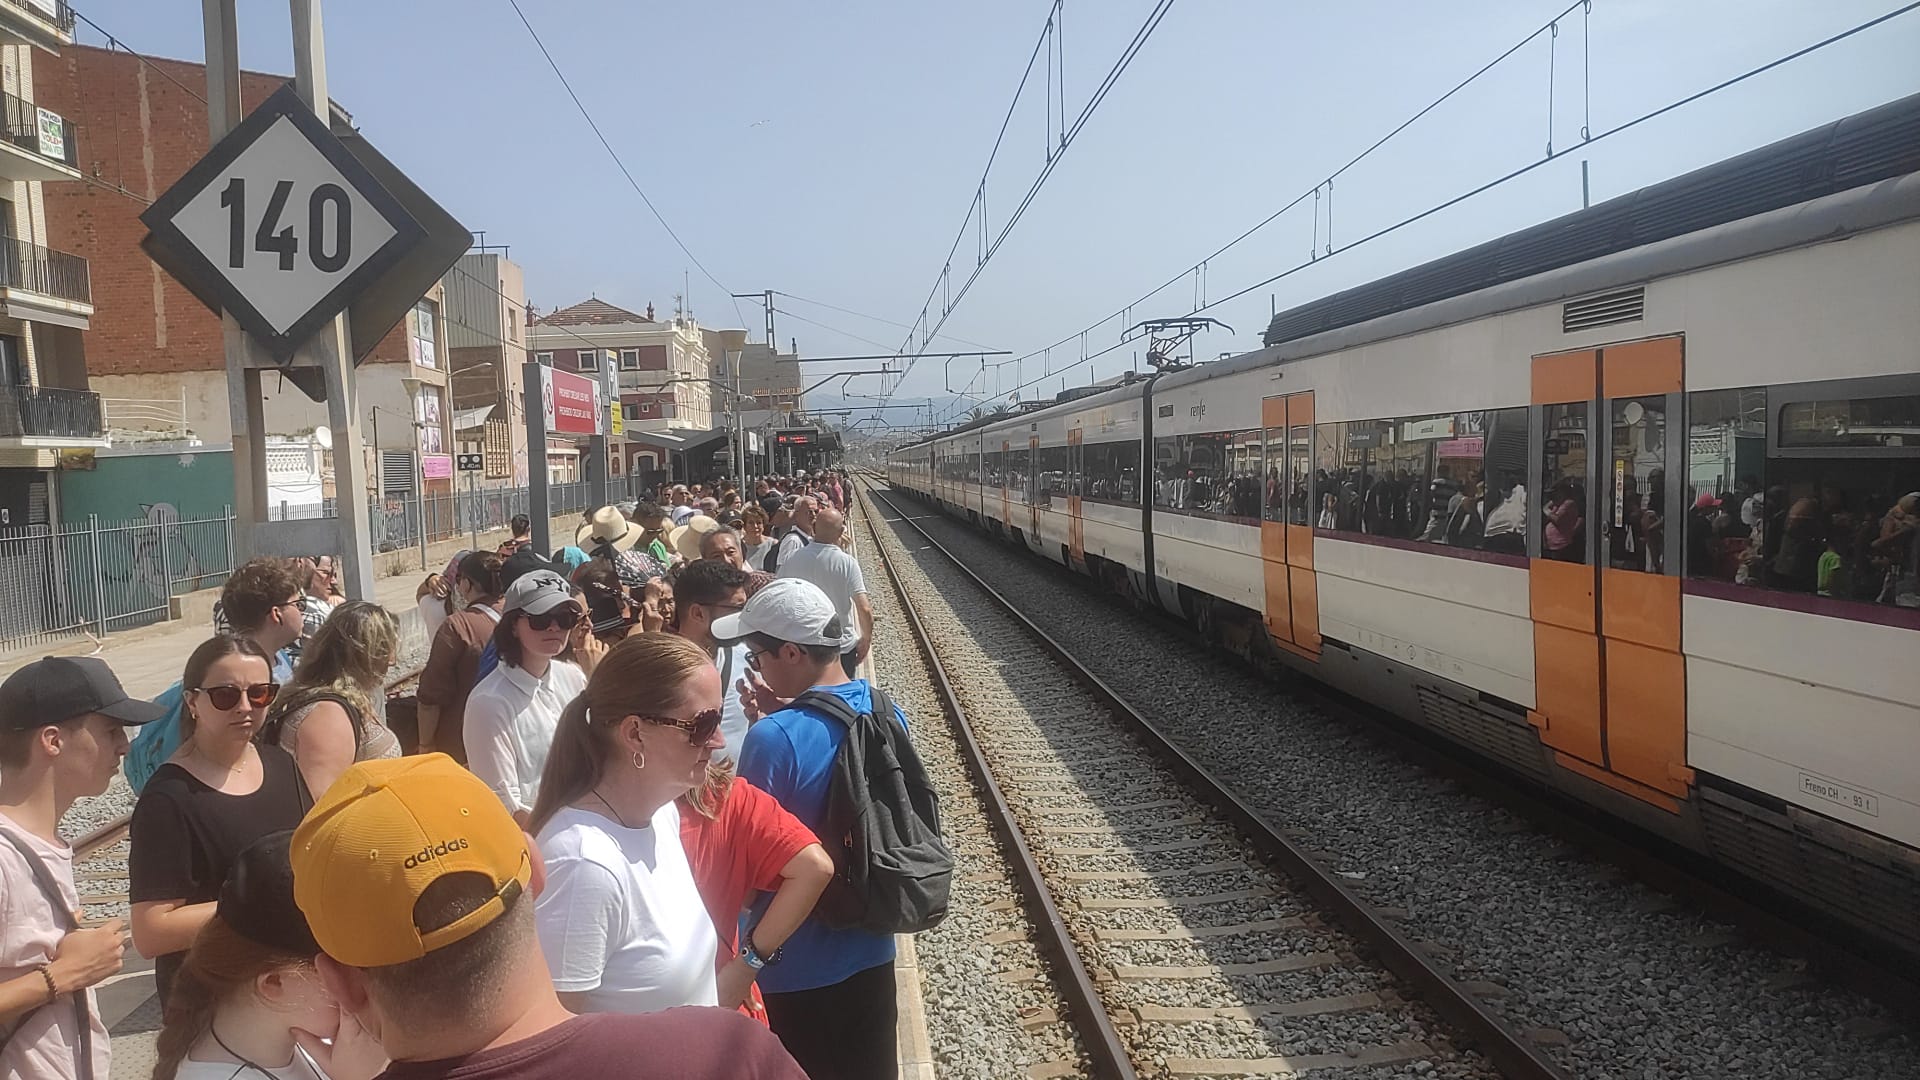 Catalonia's 'Rodalies' trains: hold ups "on 23 out of 24 days this August", denounces minister